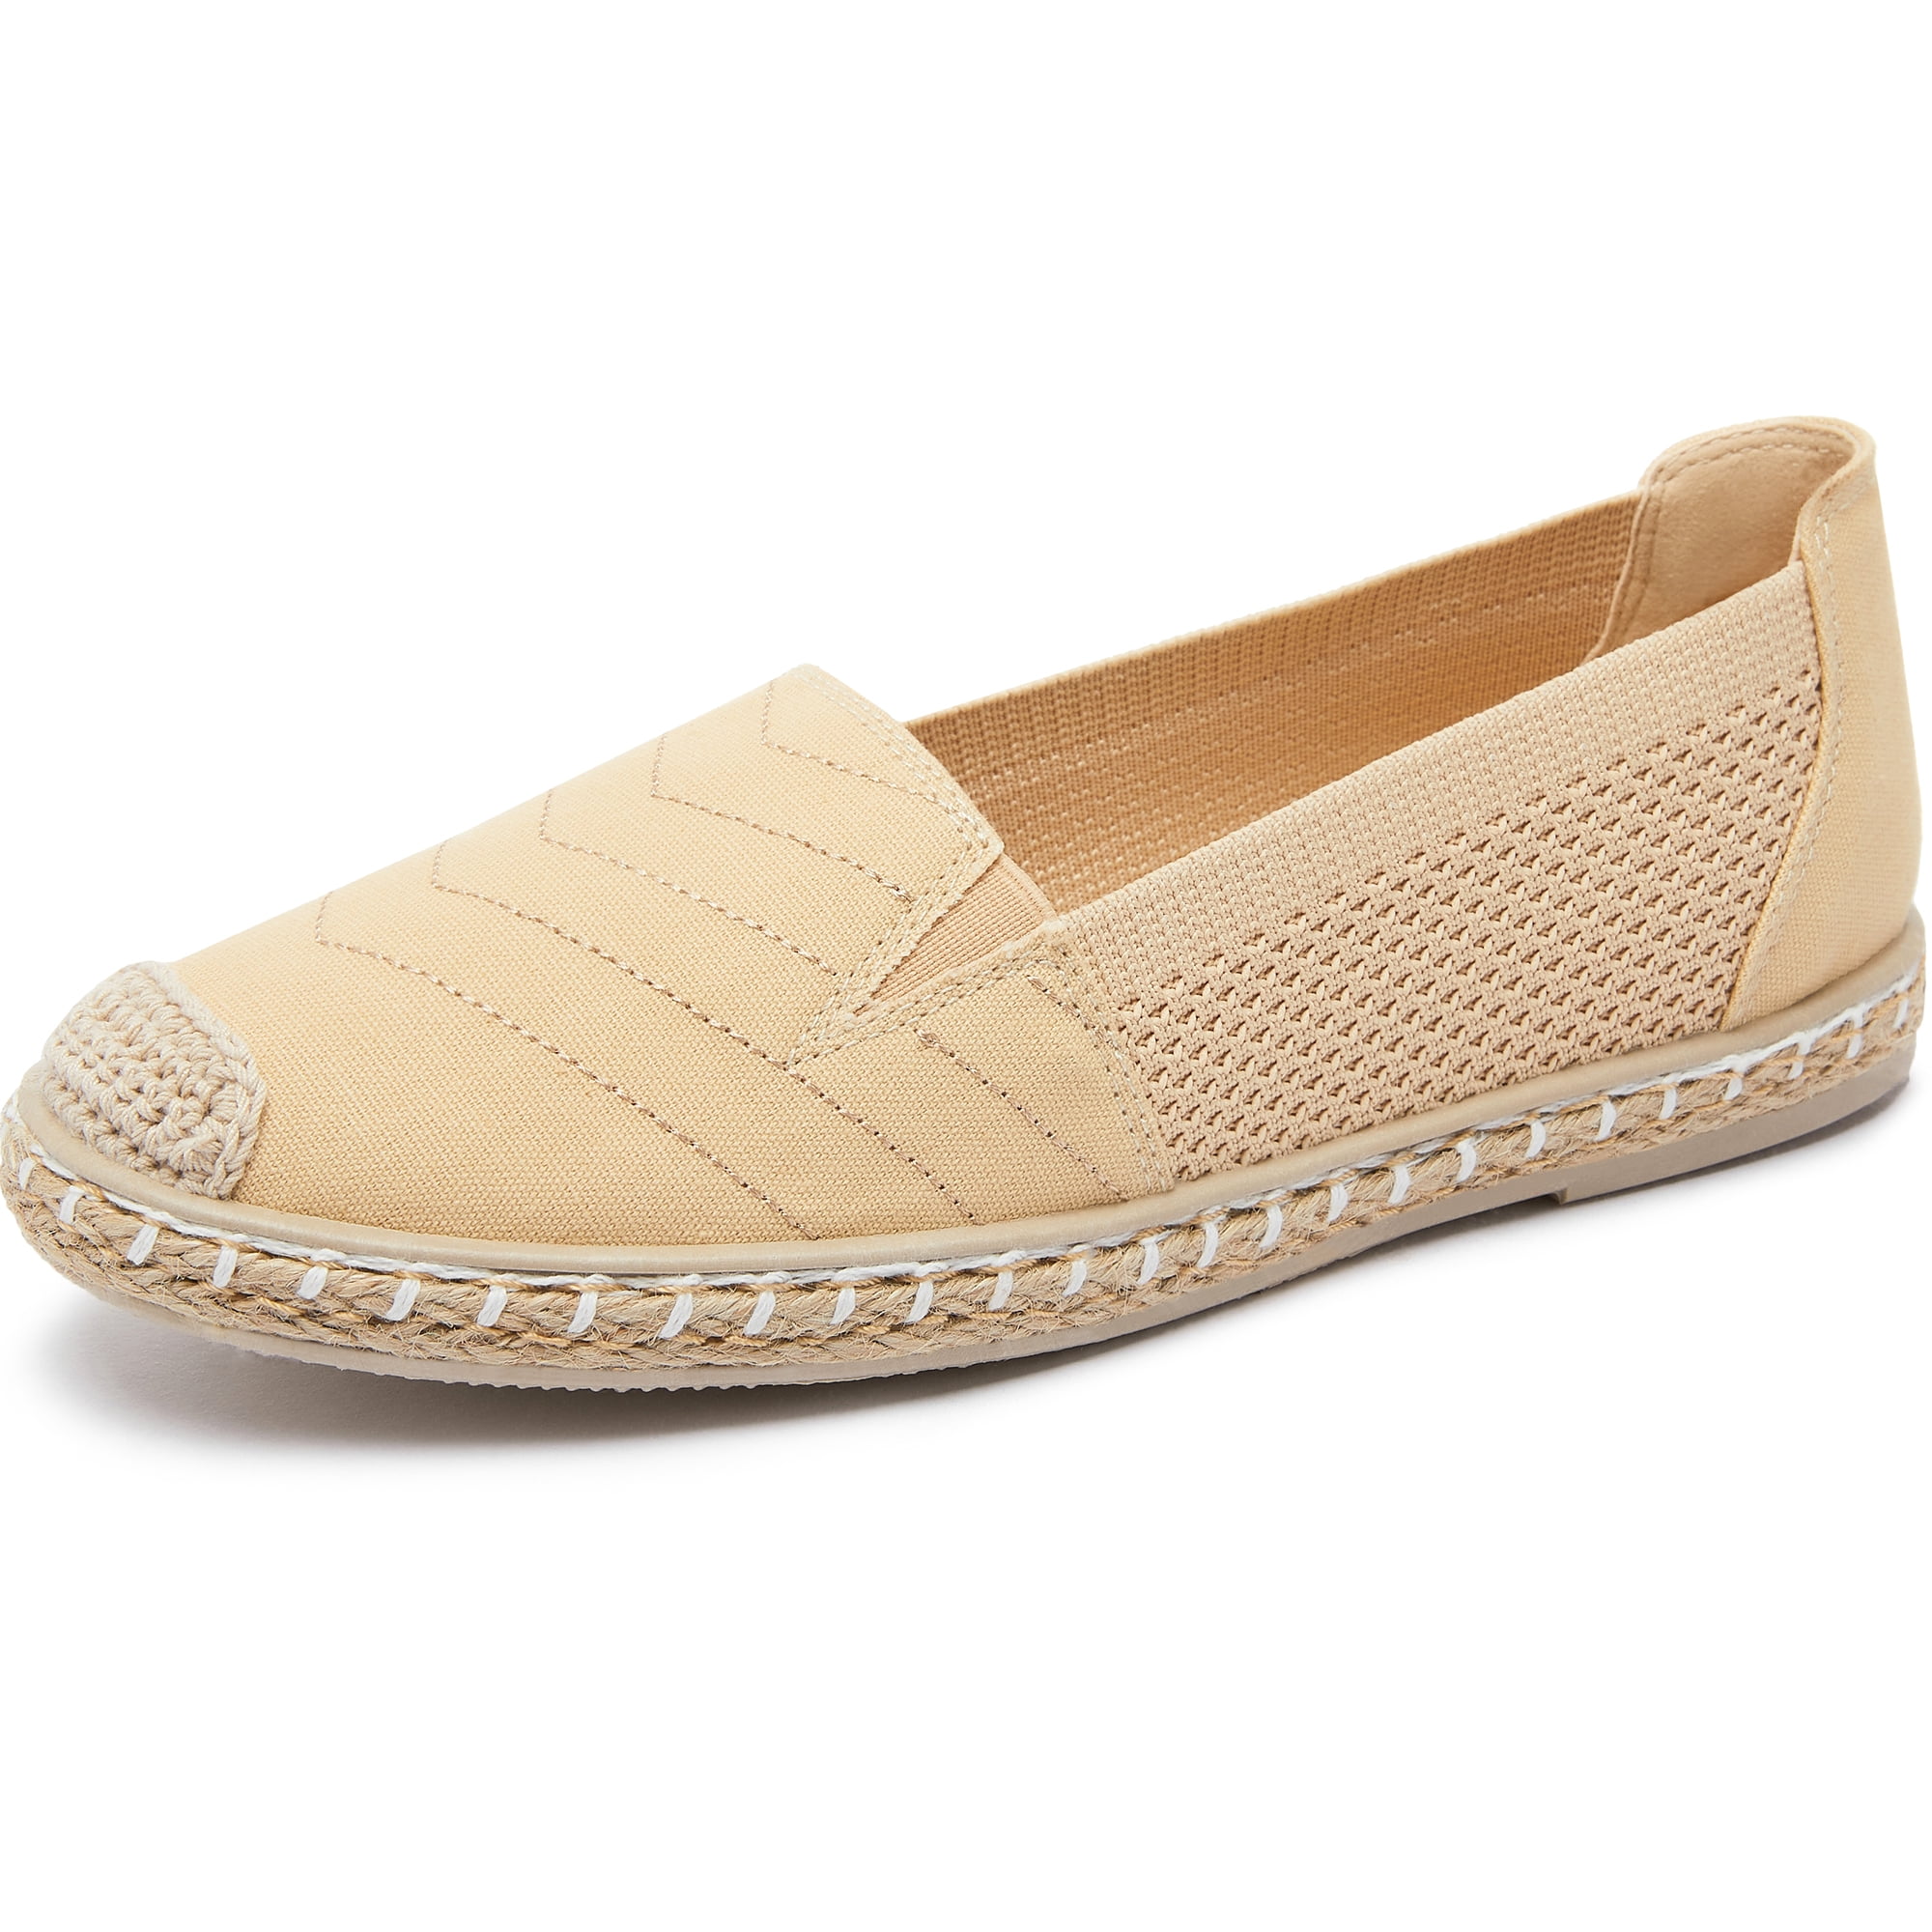 Vedolay Loafers For Women Women's Slip on Loafer Shoes Comfortable Knit  Walking Flats Casual Shoes,Beige 6.5 